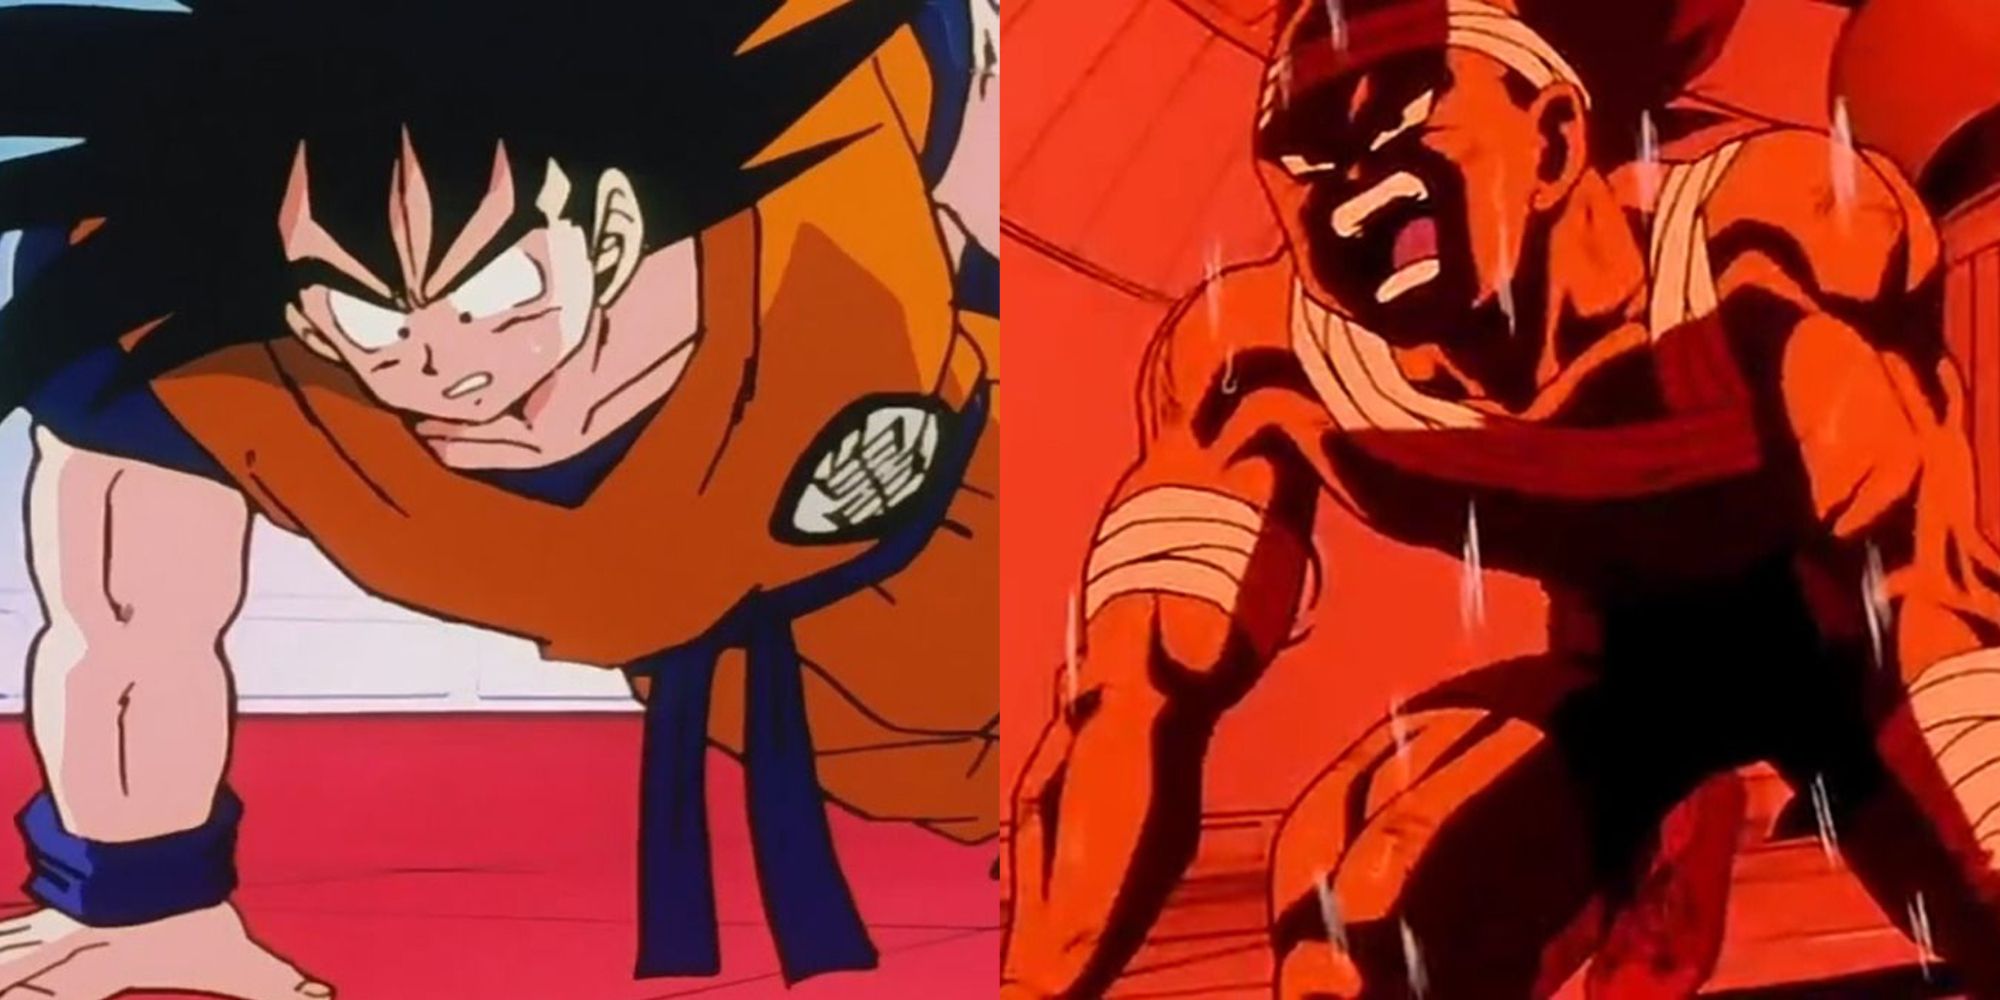 Dragon Ball Goku does push-ups and Vegeta does push-ups in the hypergravity chamber